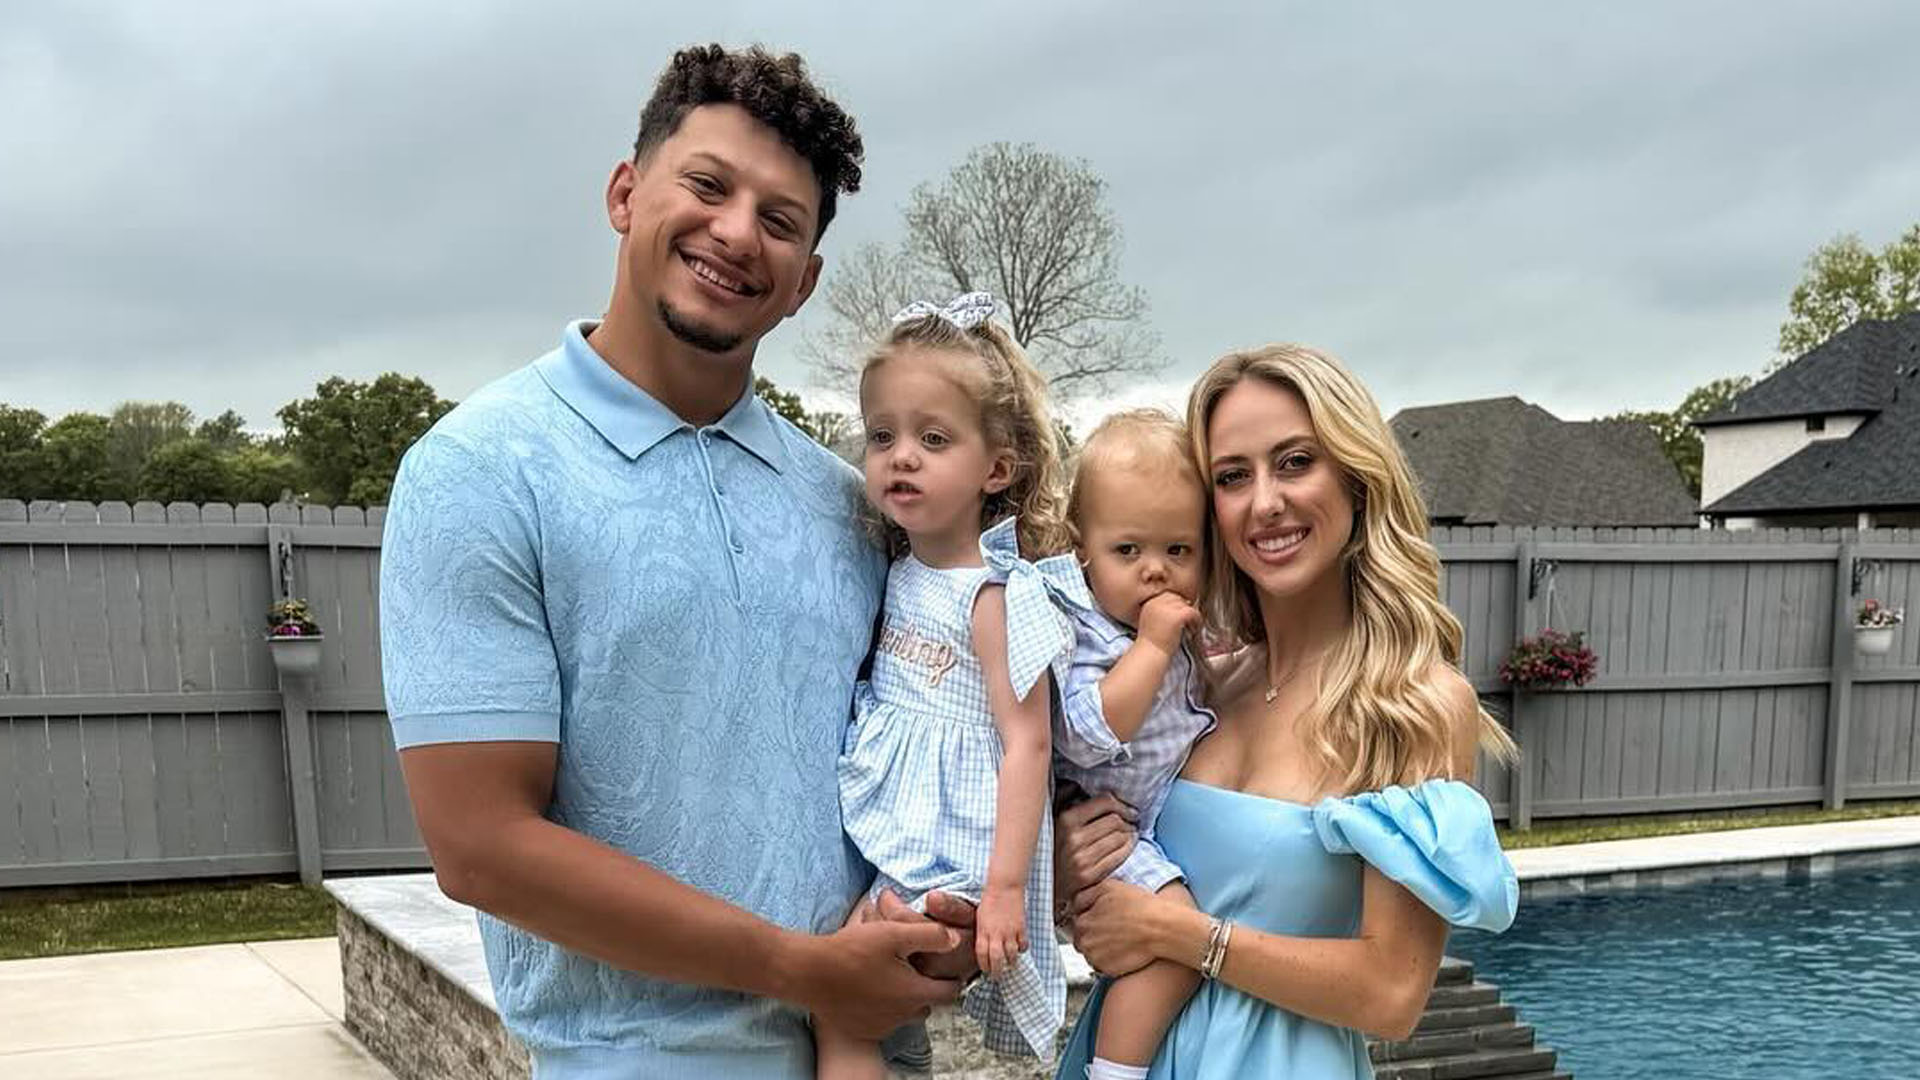 Patrick Mahomes enjoys wholesome golf day with ‘beautiful family’ as fans tell his wife Brittany to ‘frame that pic’ [Video]